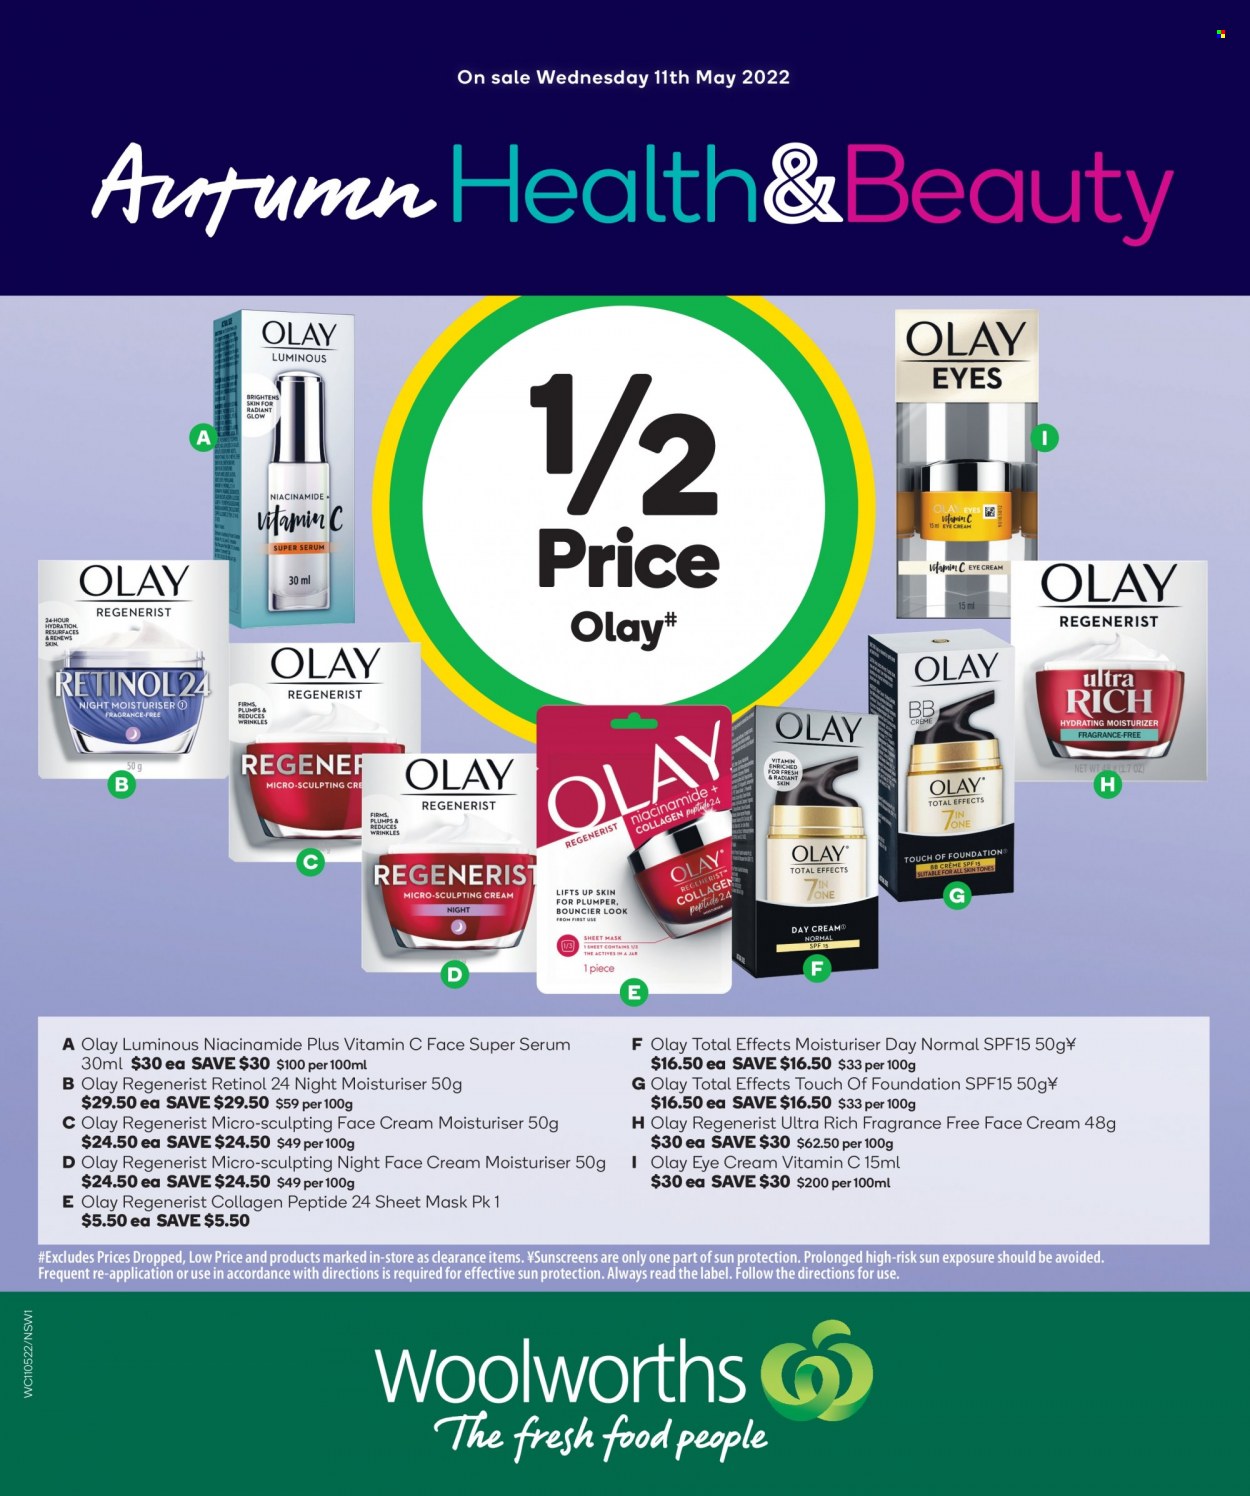 Woolworths Catalogue - 11 May 2022 - 17 May 2022 - Sales products - serum, Olay, face cream, eye cream, Niacinamide, vitamin c. Page 1.